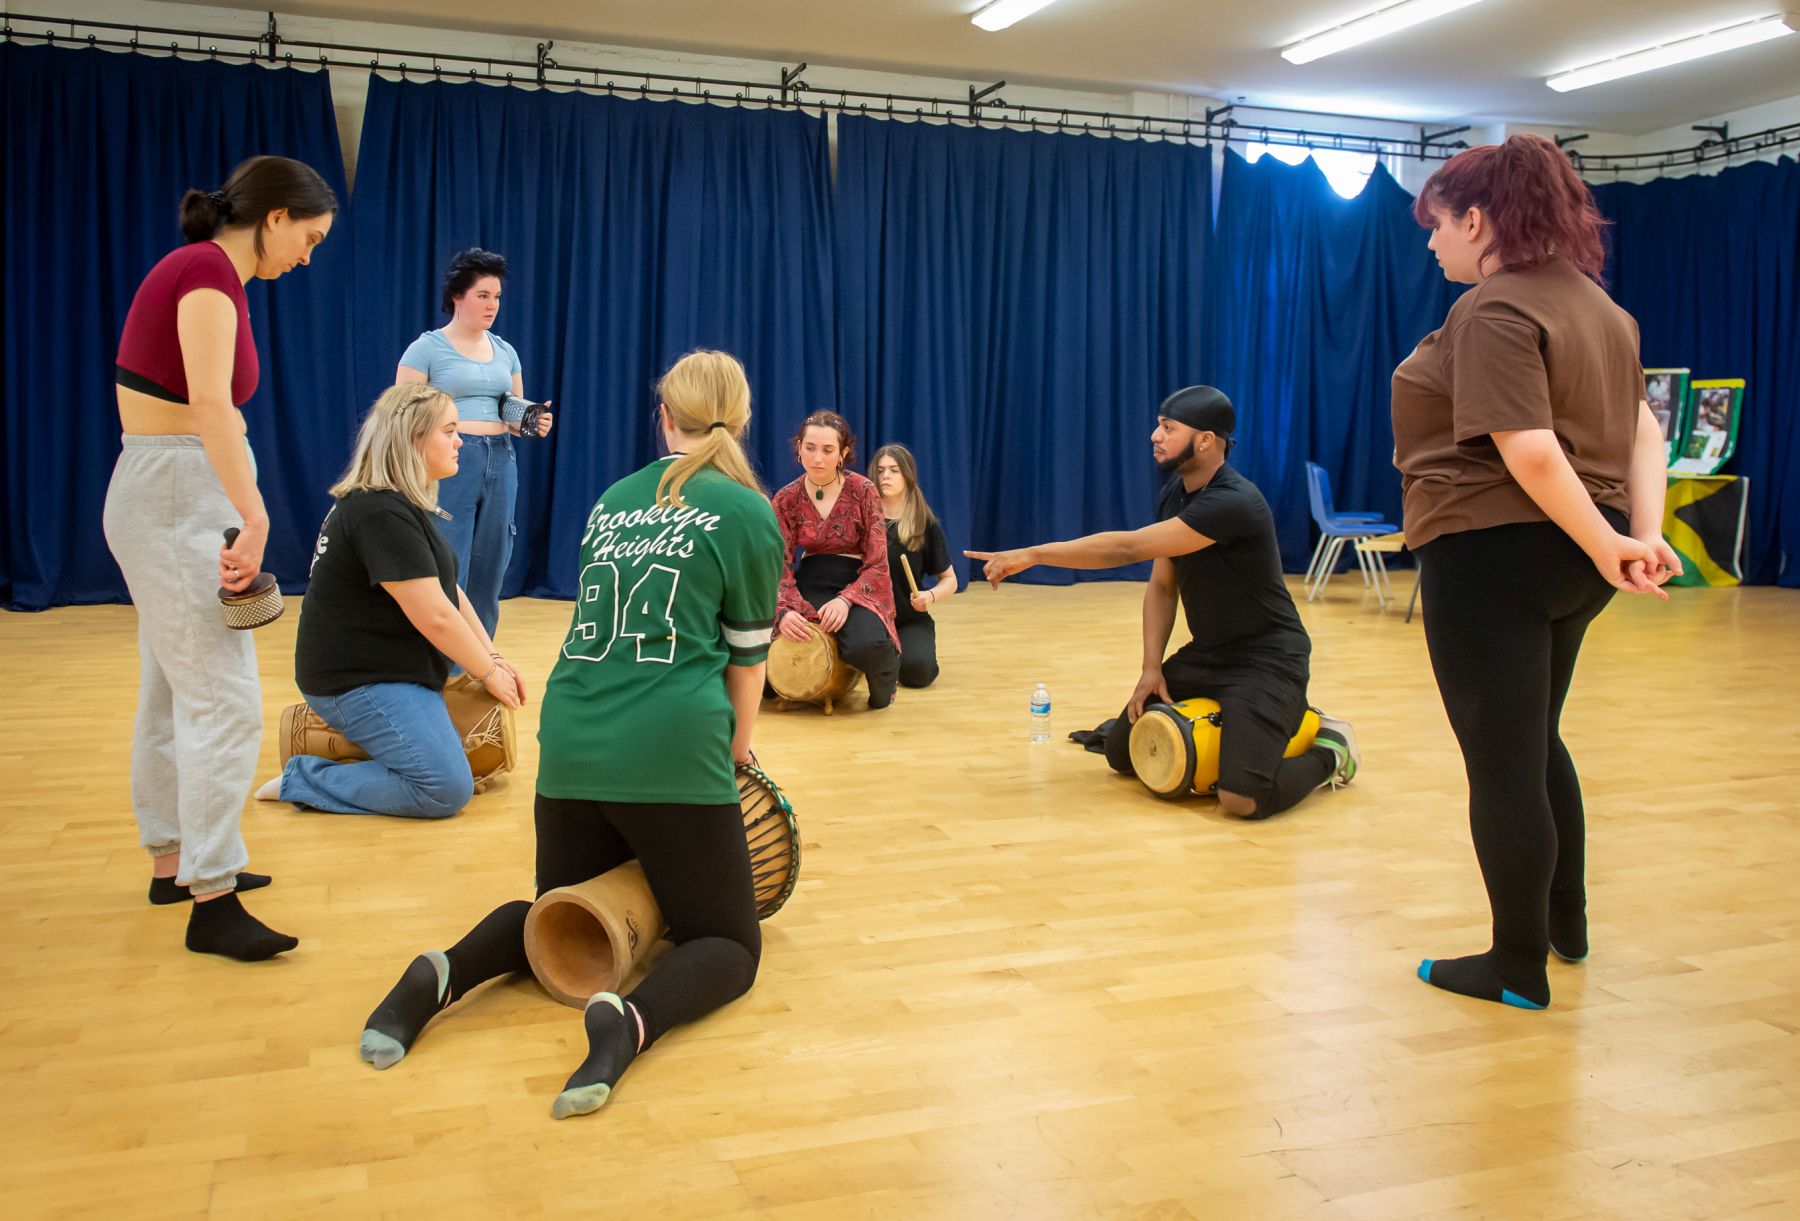 MA Professional Practice: Theatre and Drama Facilitation Course Overview 